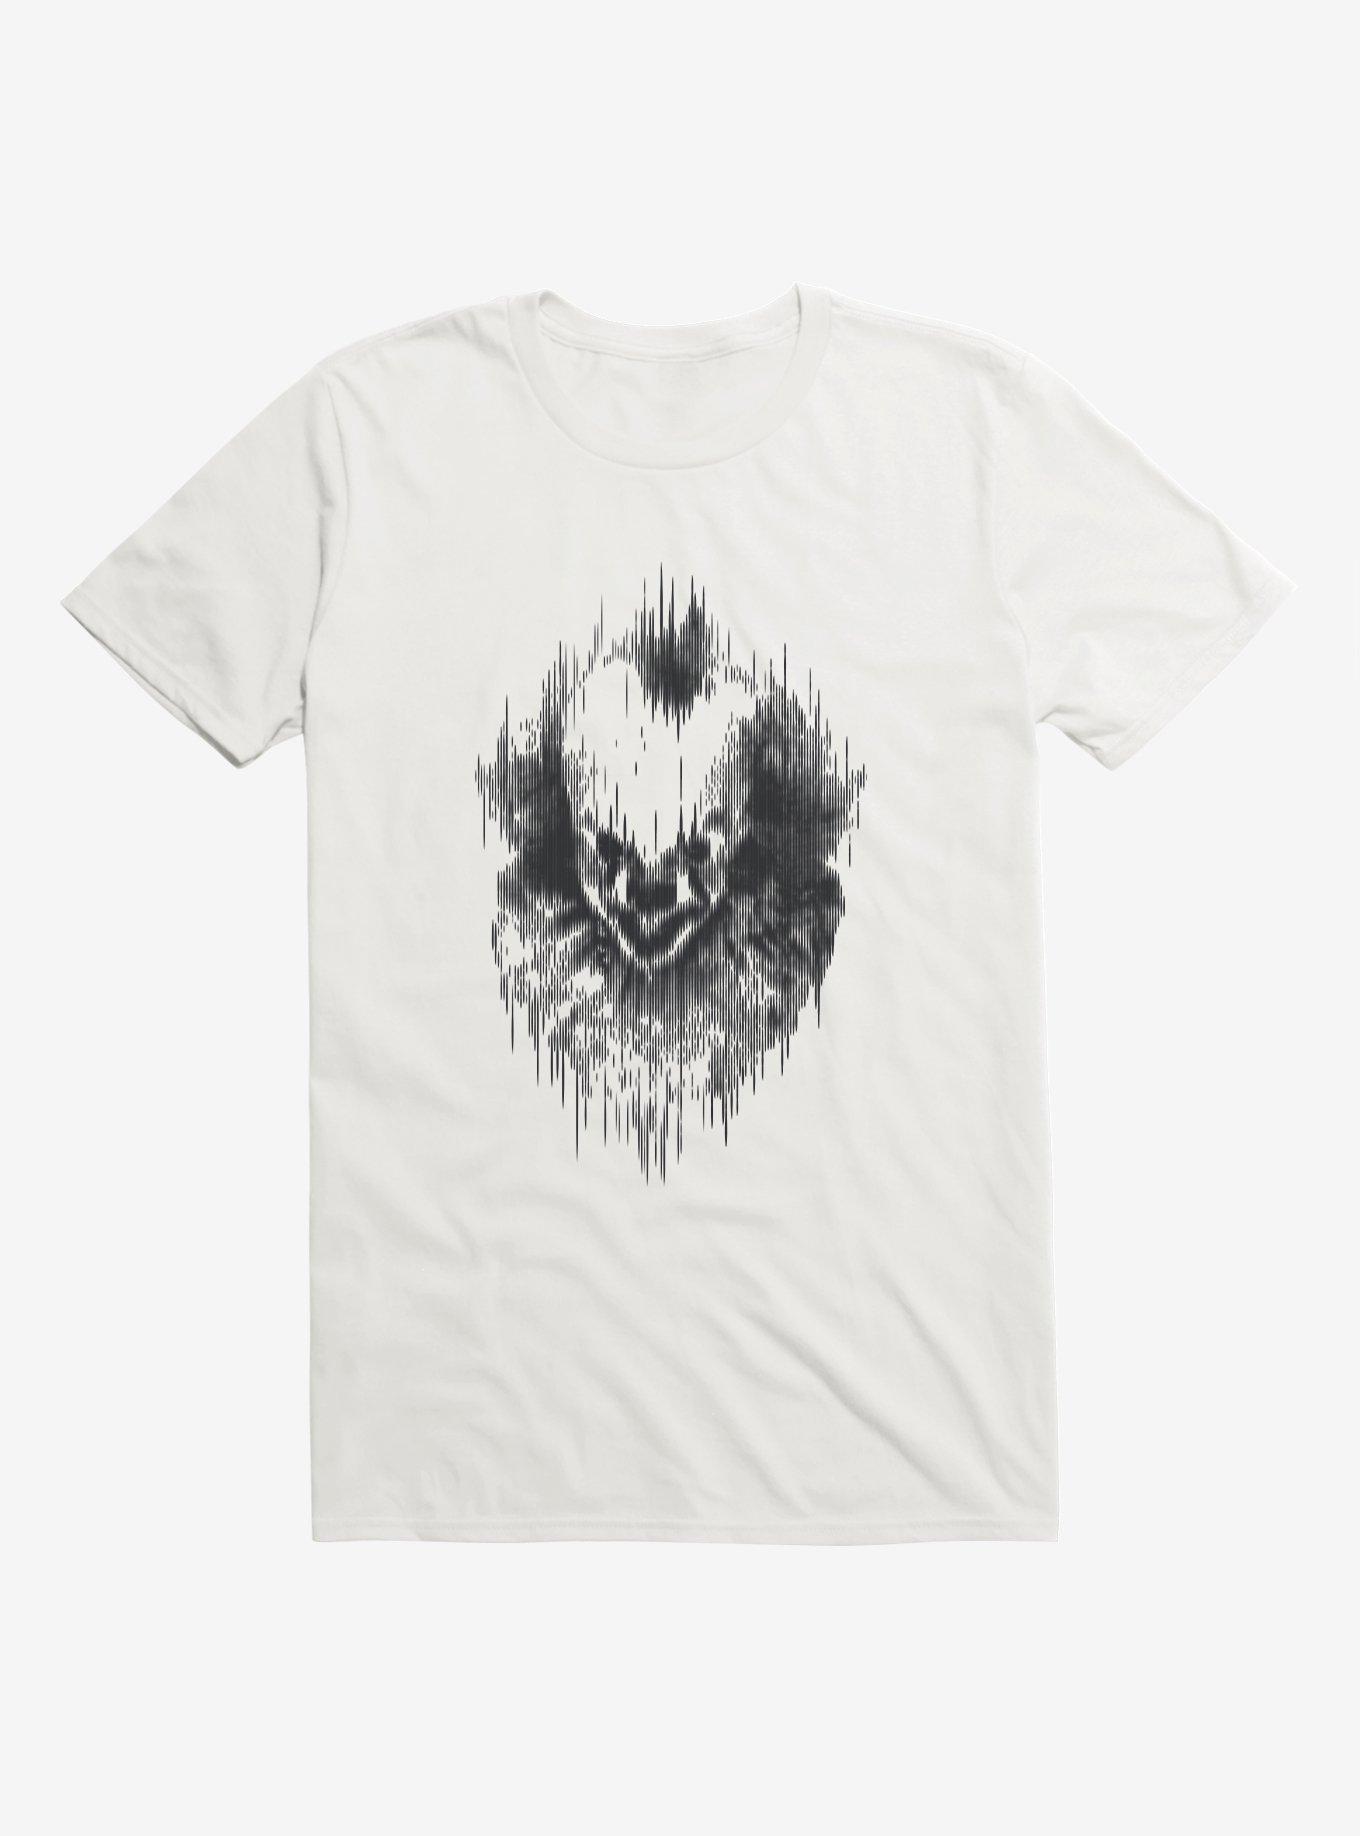 IT Chapter Two Pennywise Static Outline T-Shirt | Hot Topic